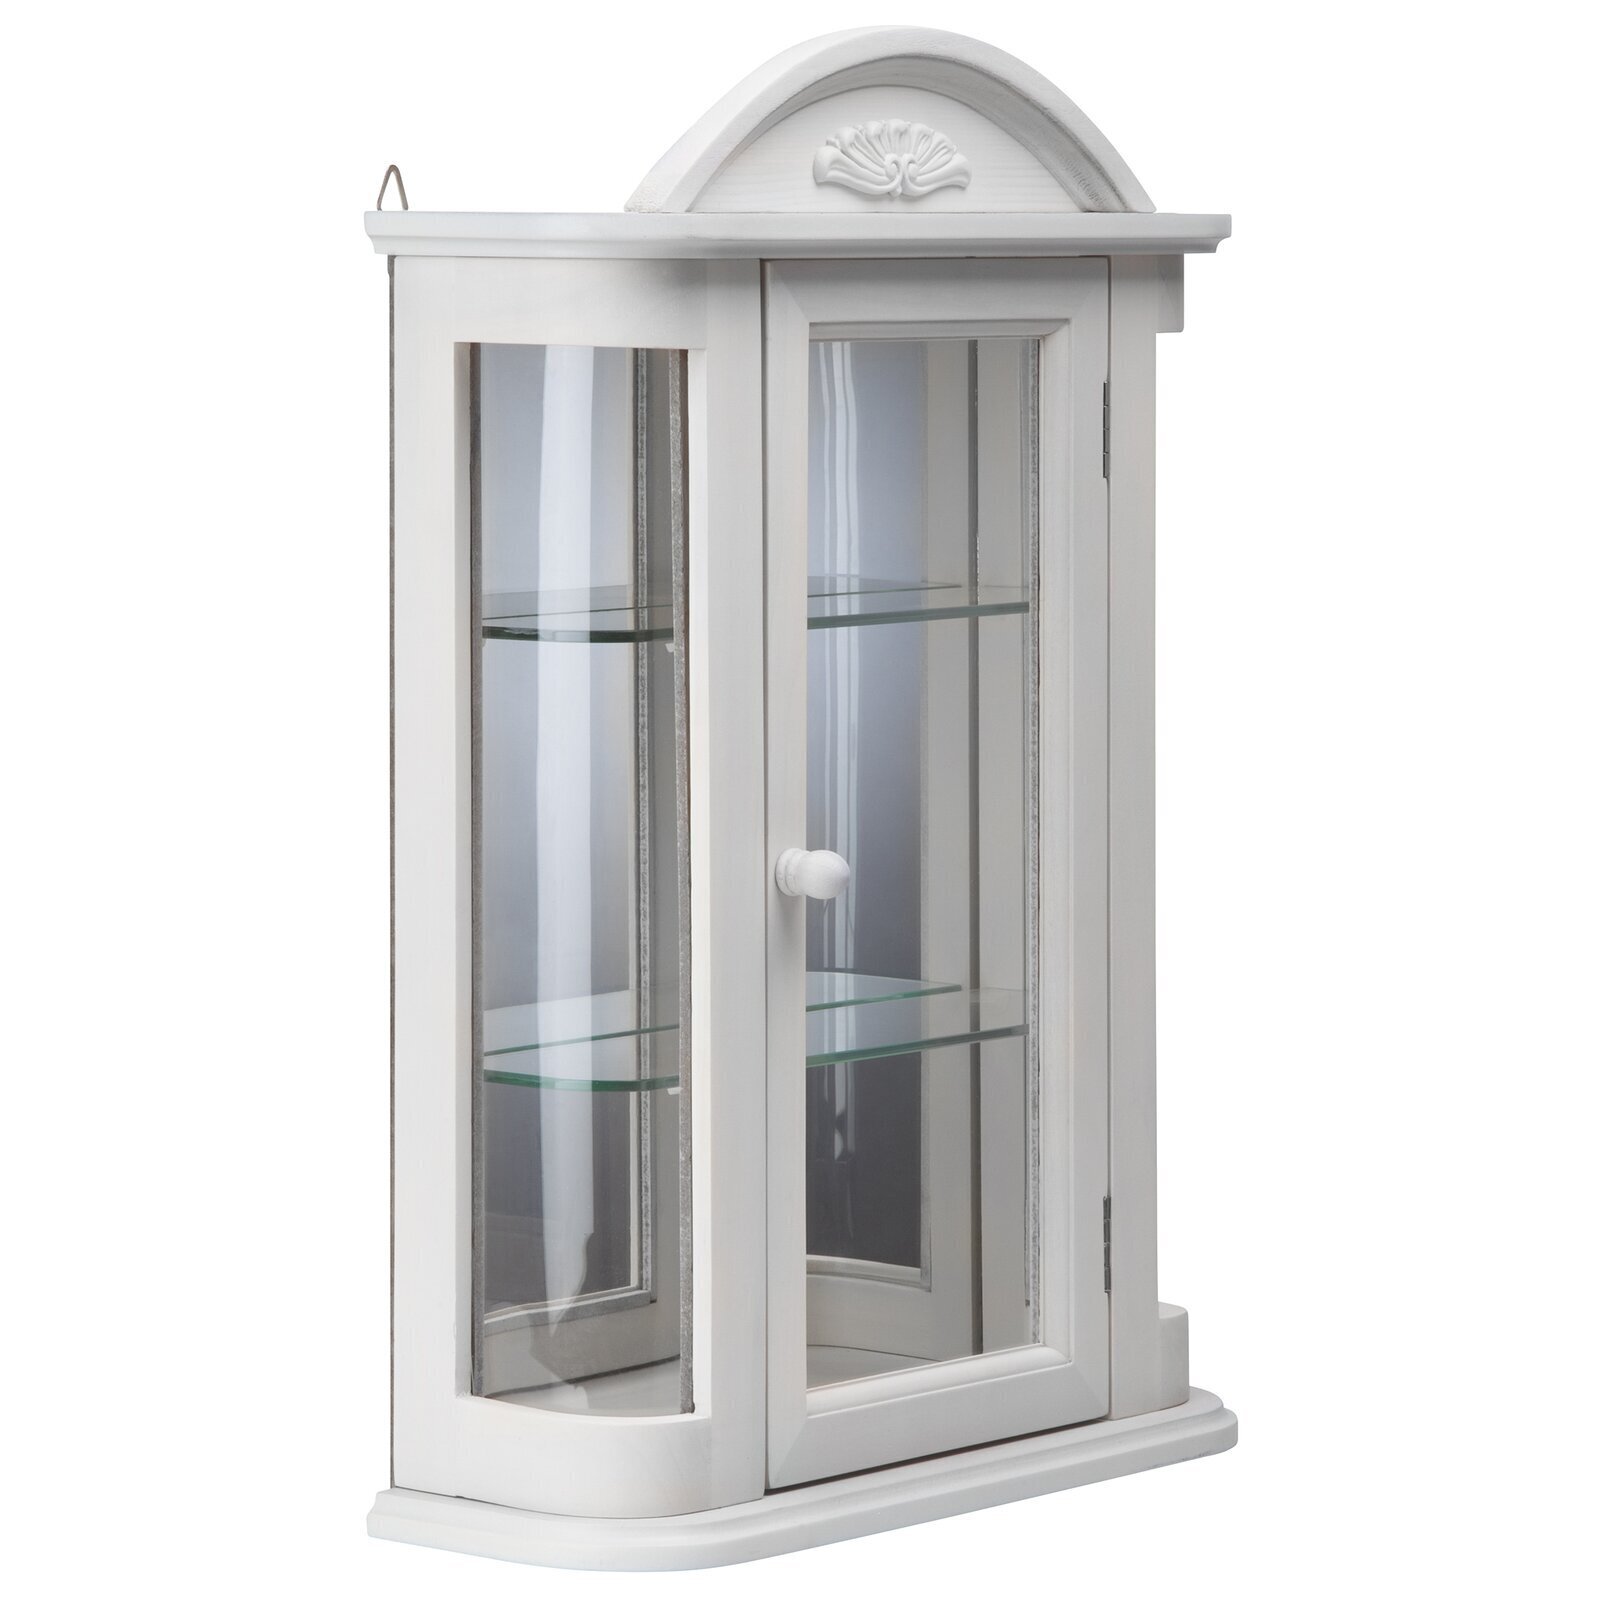 Wall Mounted Display Cabinet with Glass Doors and Shelves